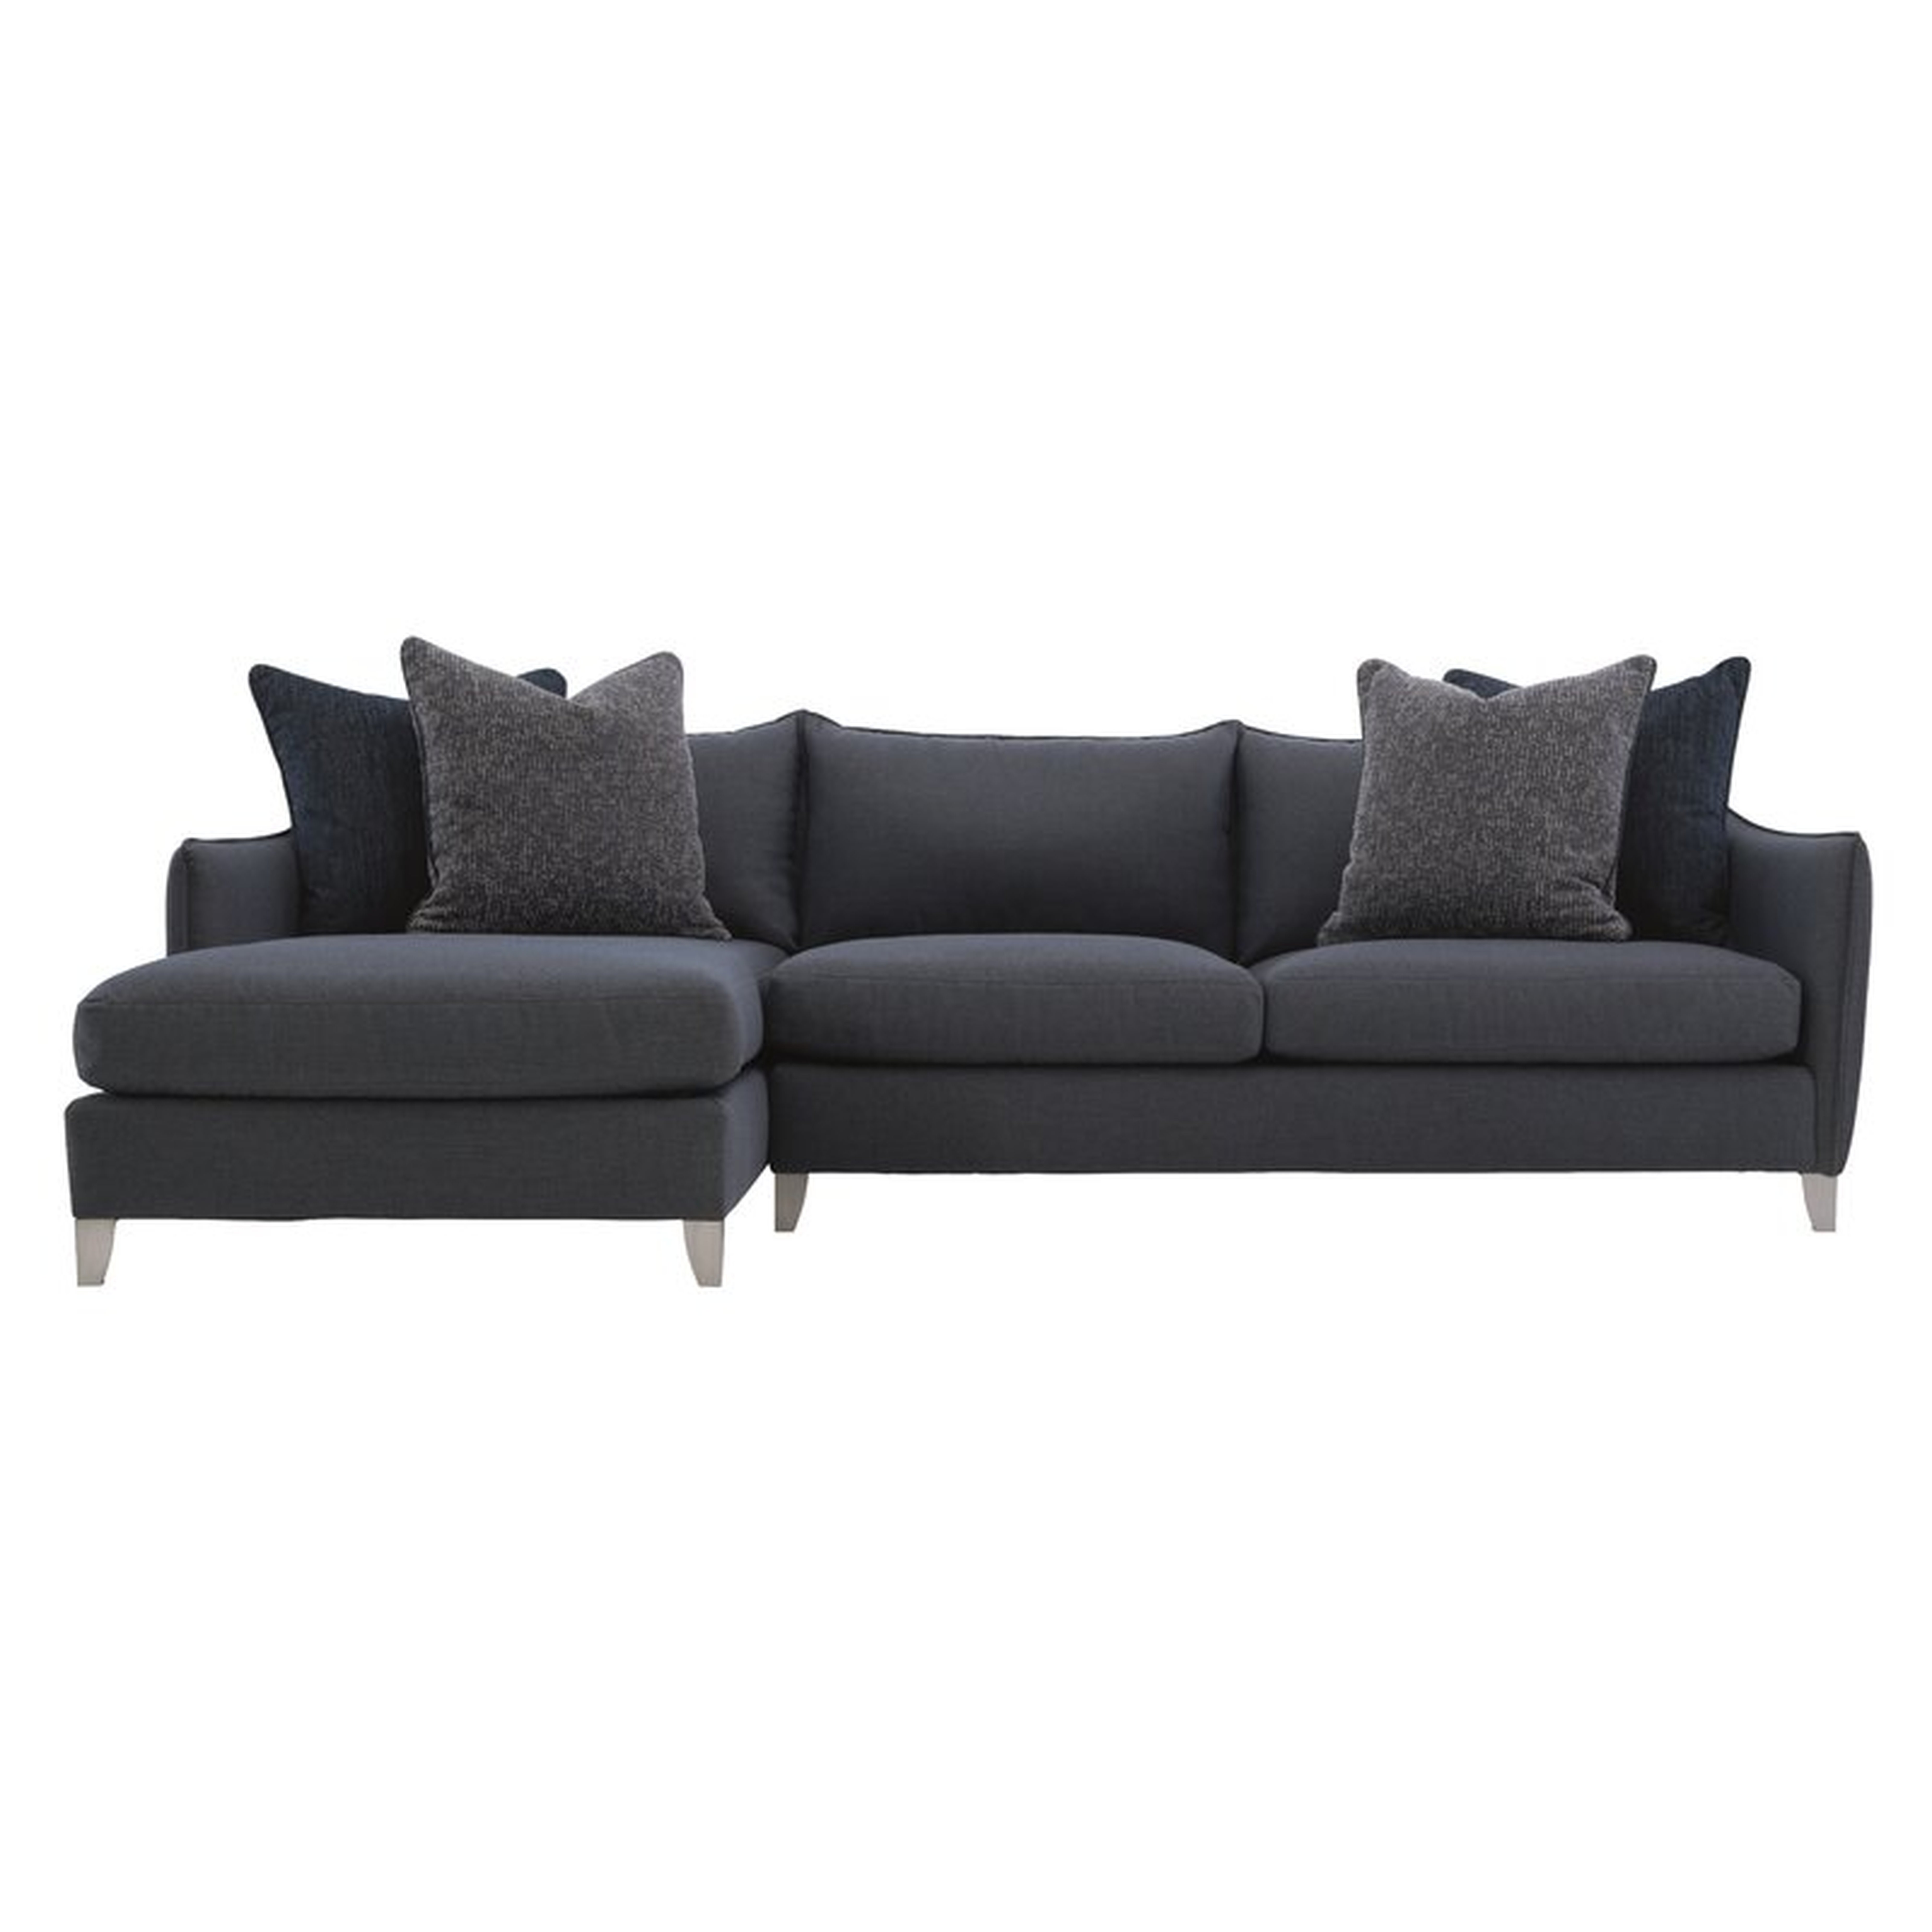 Bernhardt Monterey Patio Sectional with Cushions - Perigold